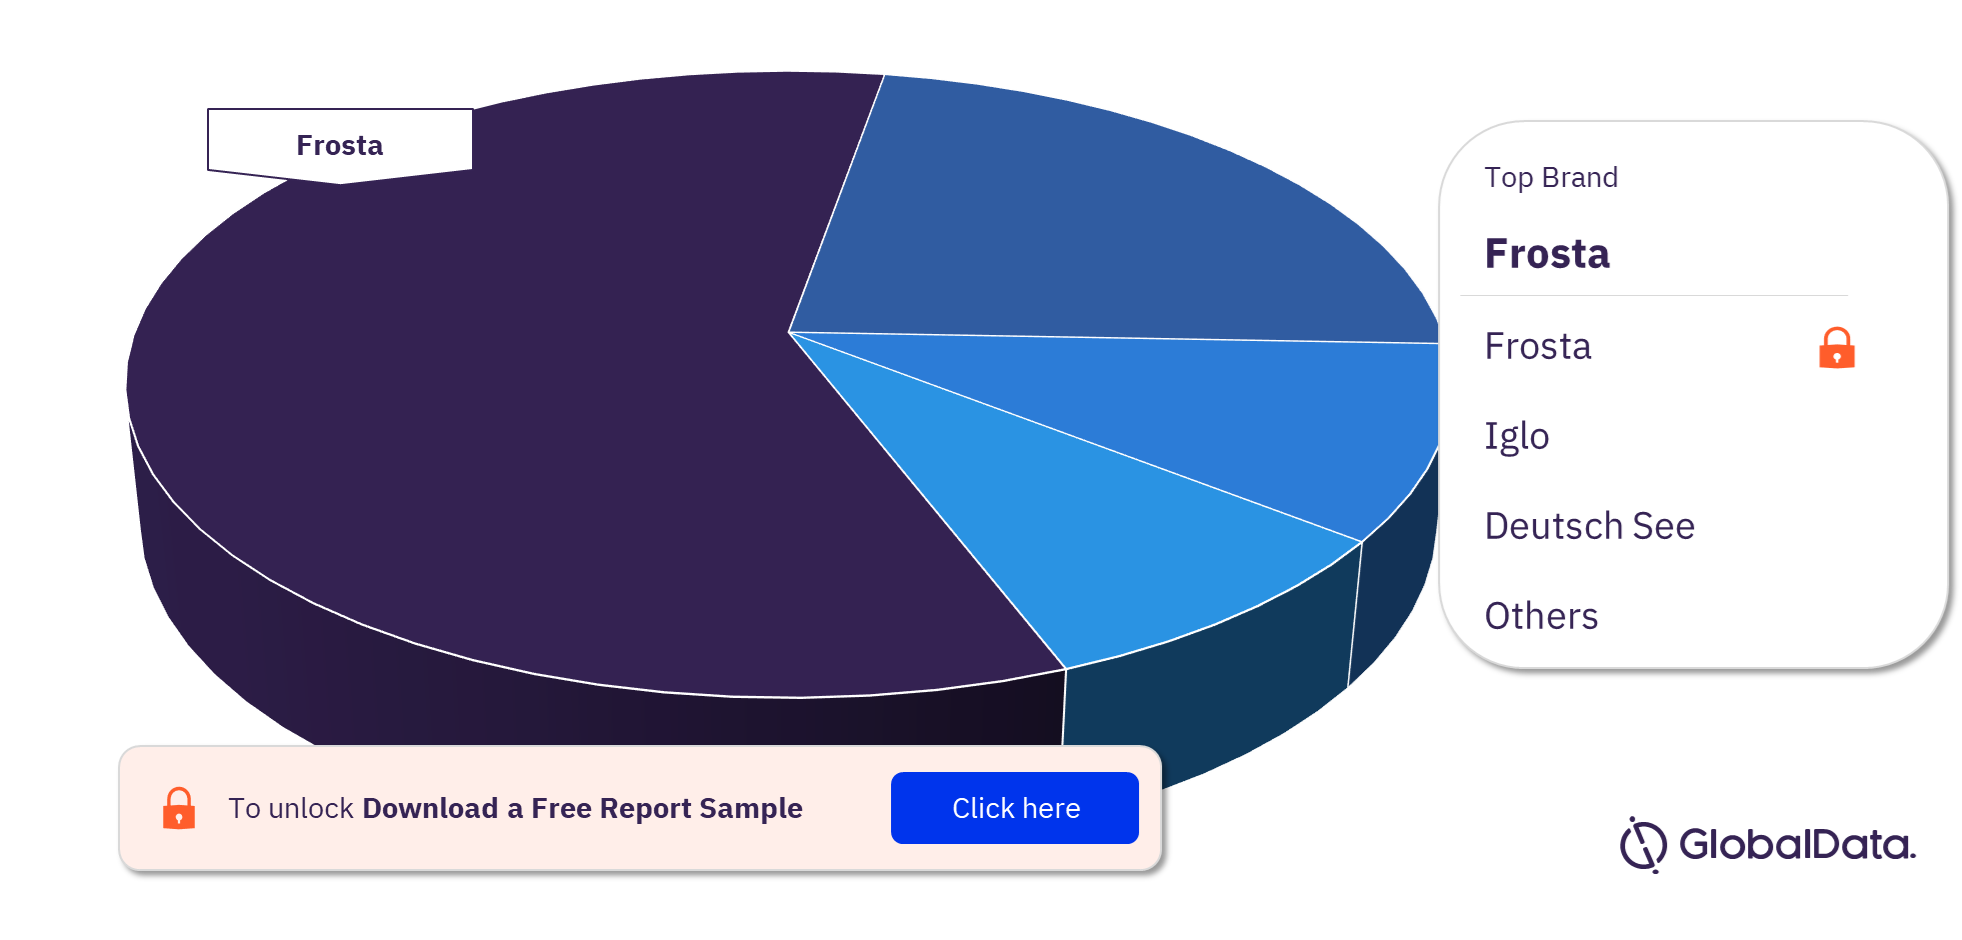 Germany Frozen Fish and Seafood Market Analysis, by Brands, 2021 (%)